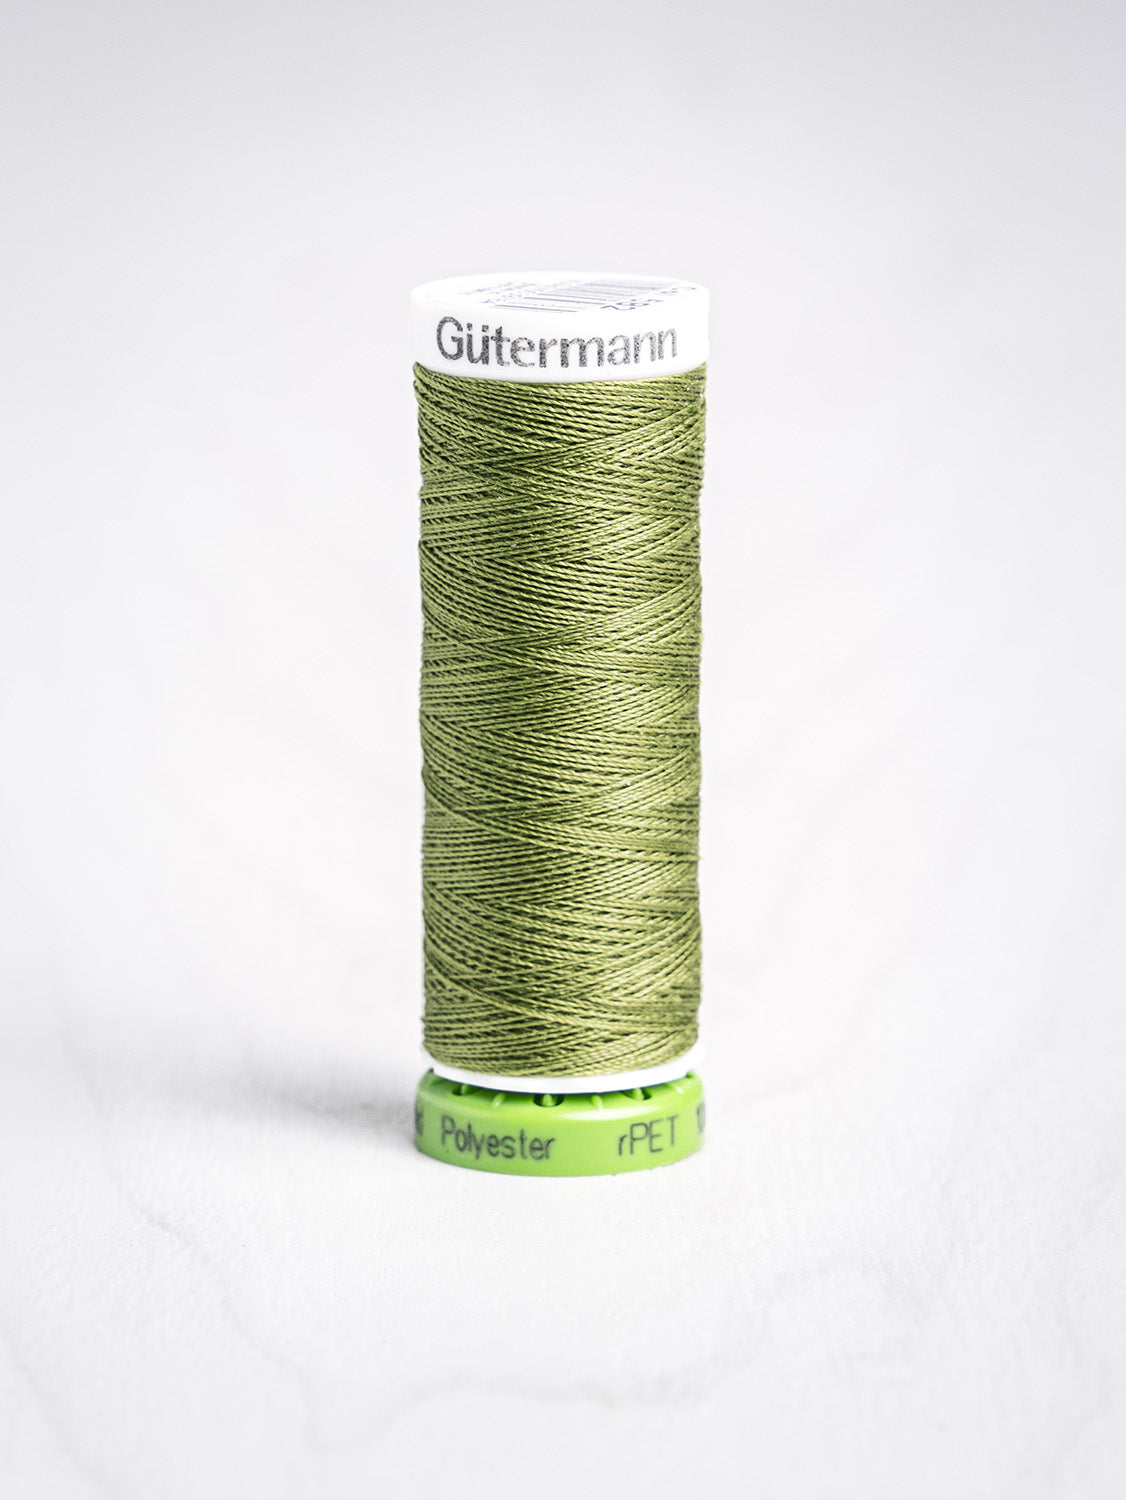 Gütermann All Purpose rPET Recycled Thread - Pale Green 582